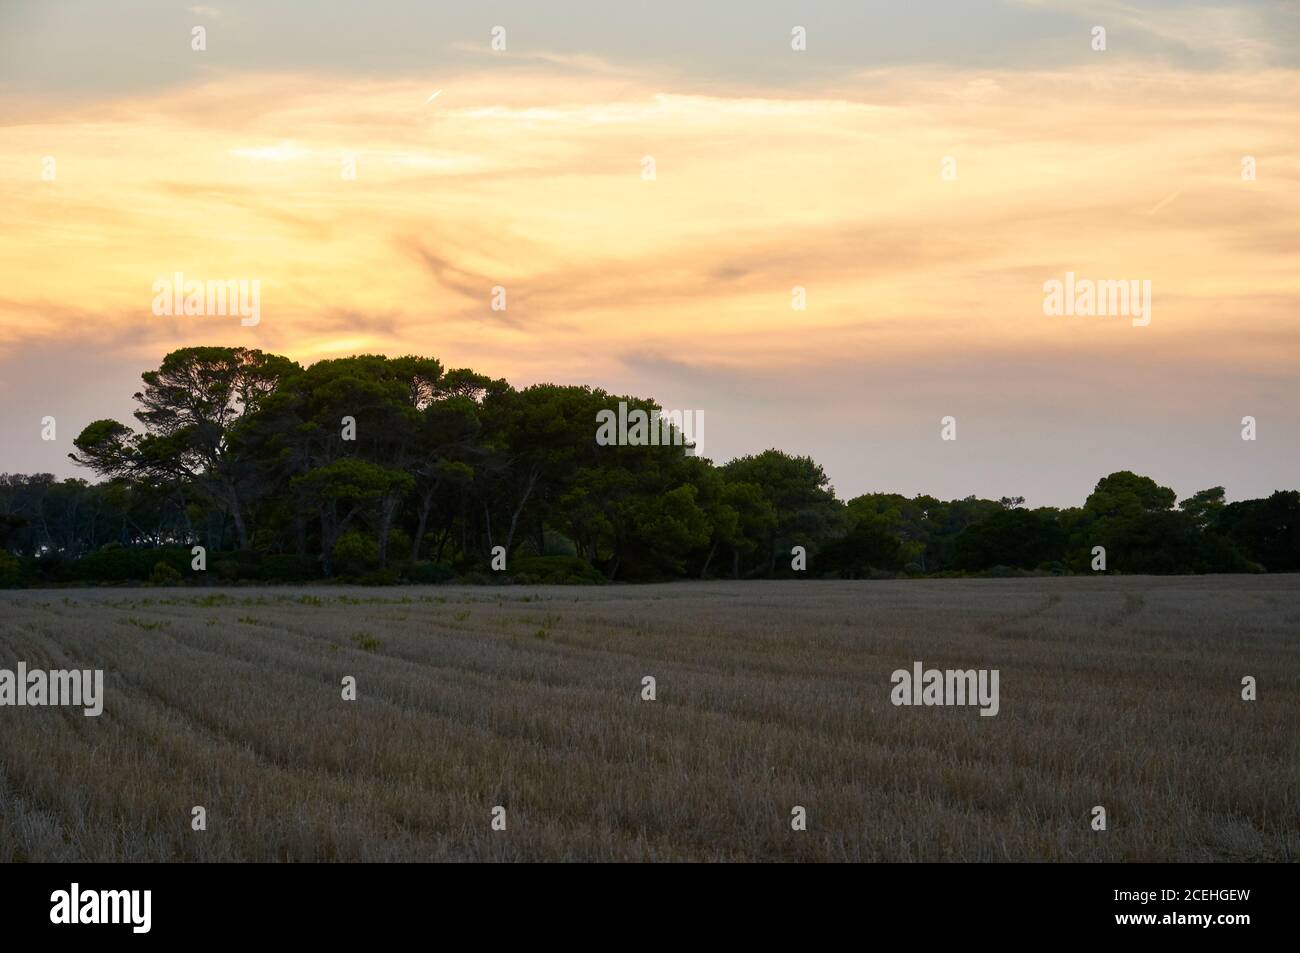 Crop fields near Cap de Ses Salines at sunset with Aleppo pines (Pinus halepensis) in the background (Santanyí, Majorca, Balearic Islands, Spain) Stock Photo